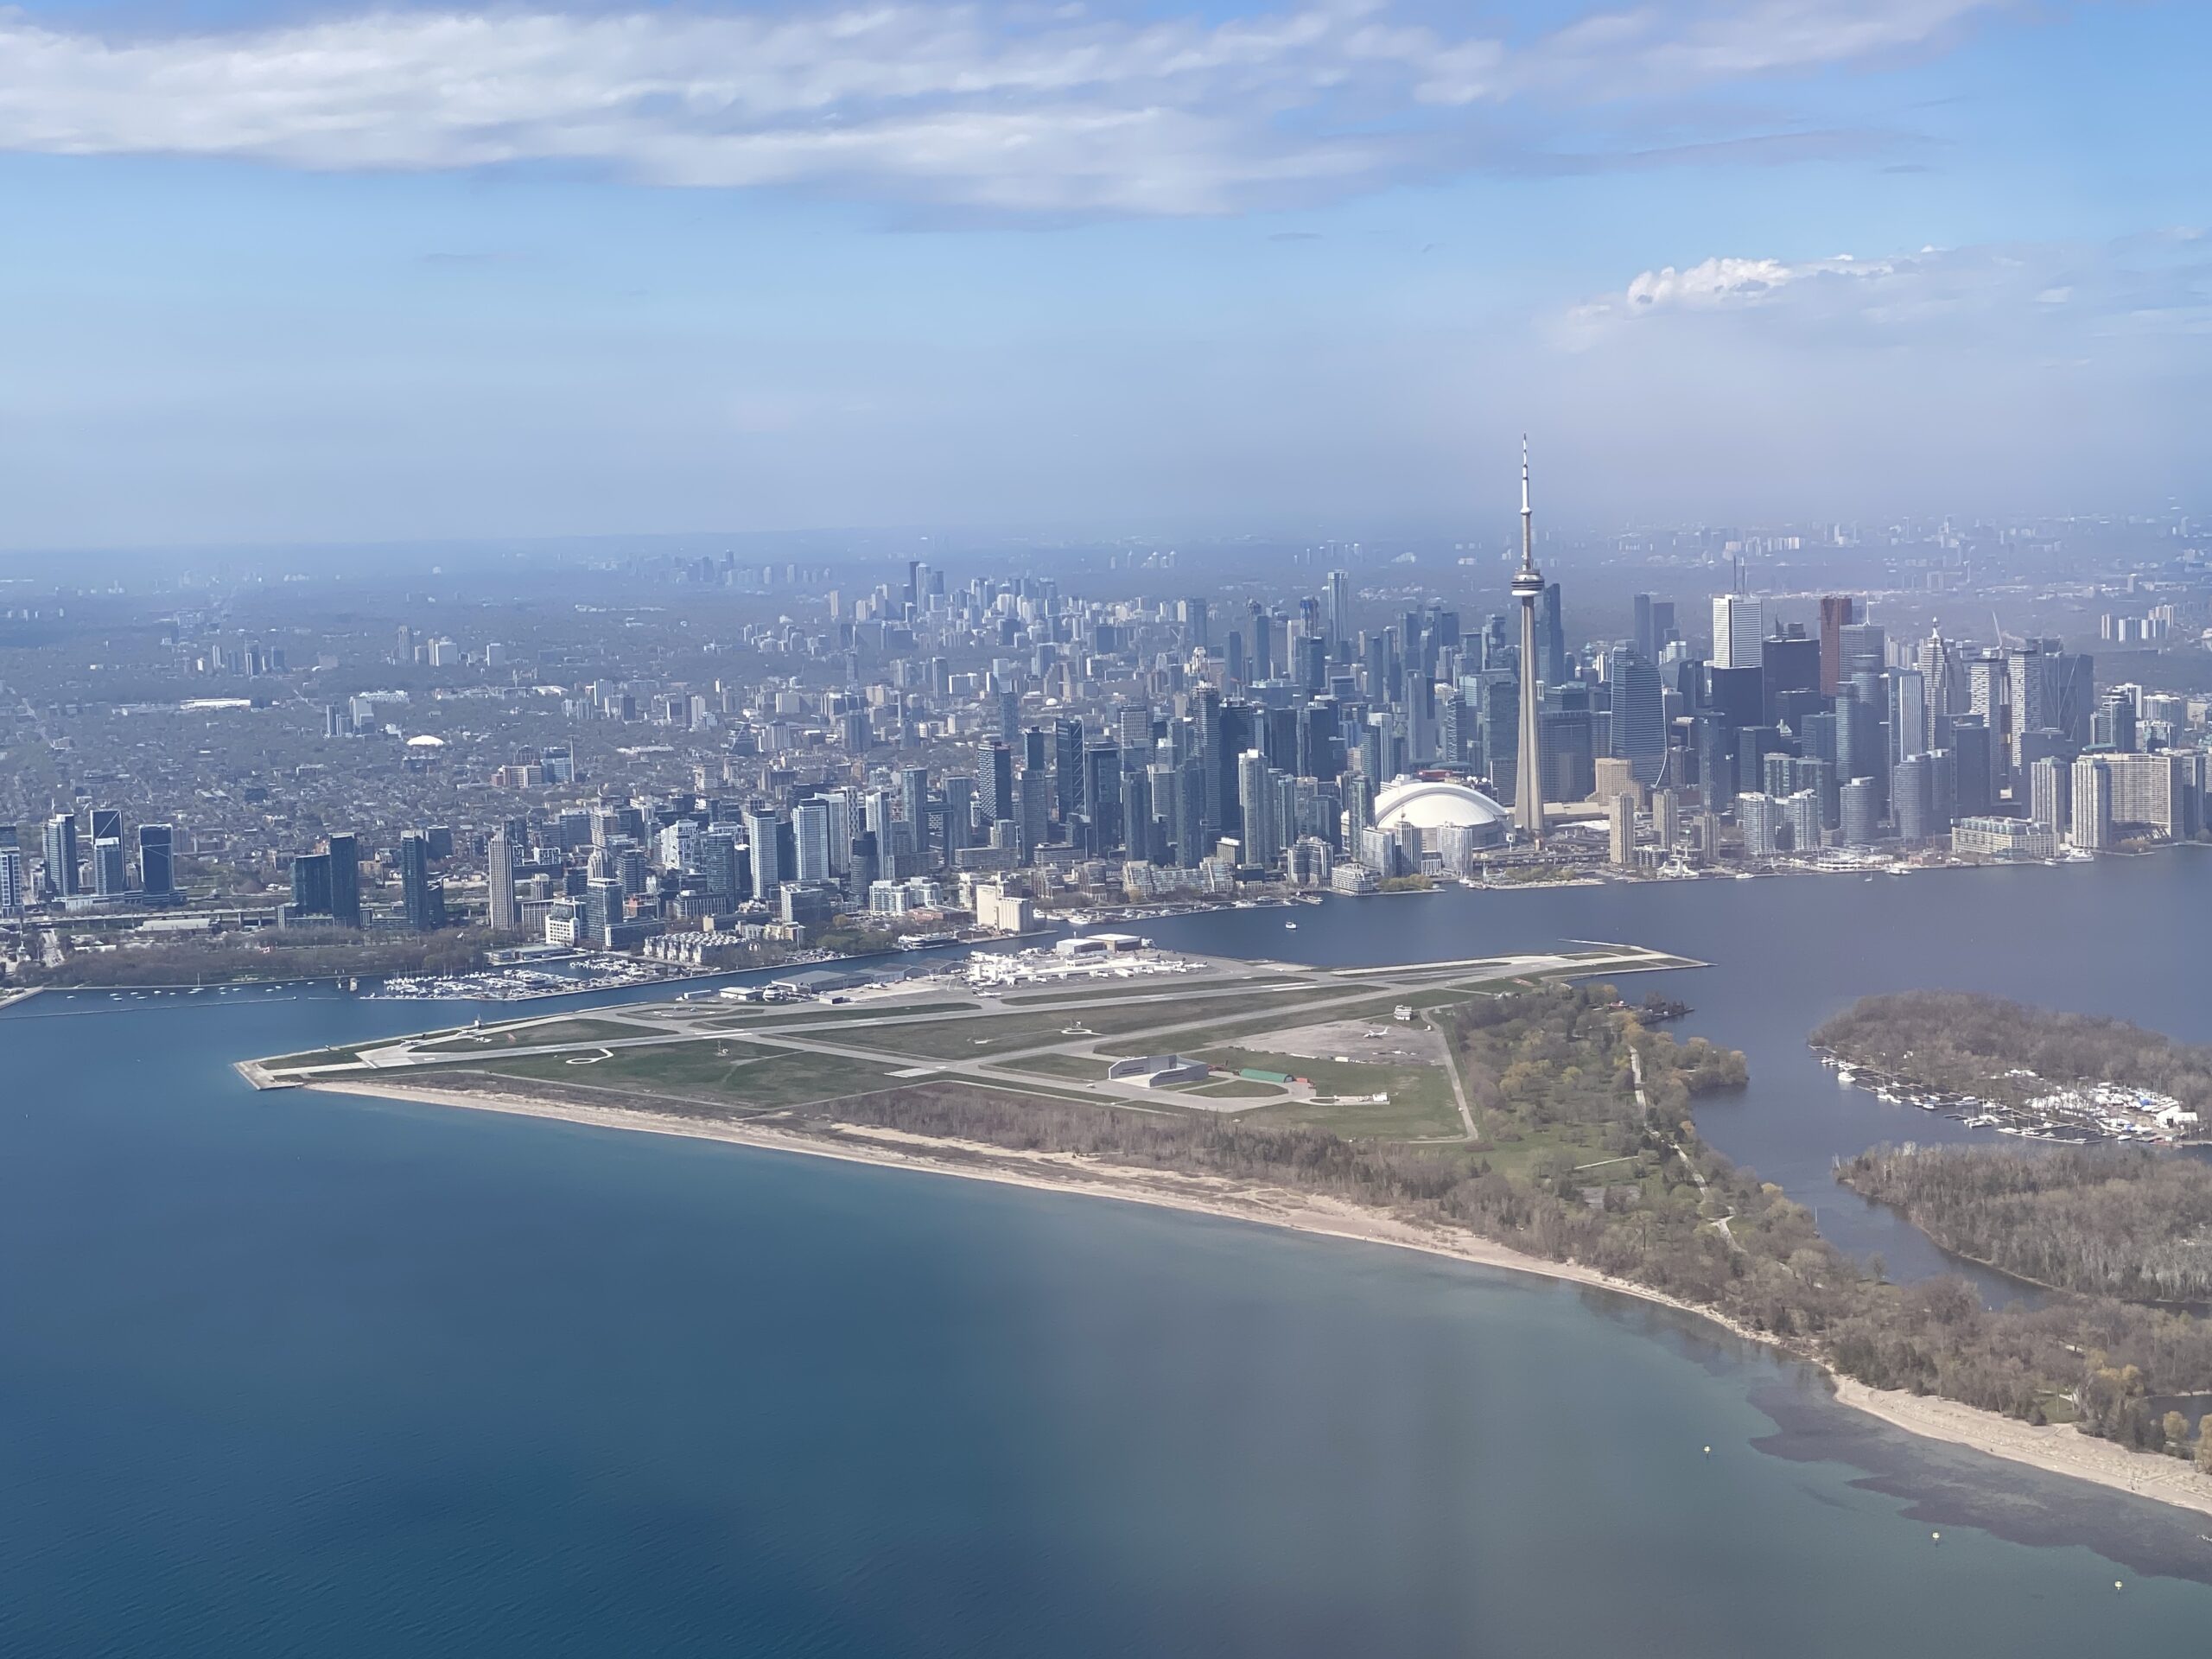 The Meigs Field Massacre and Canadian Airports